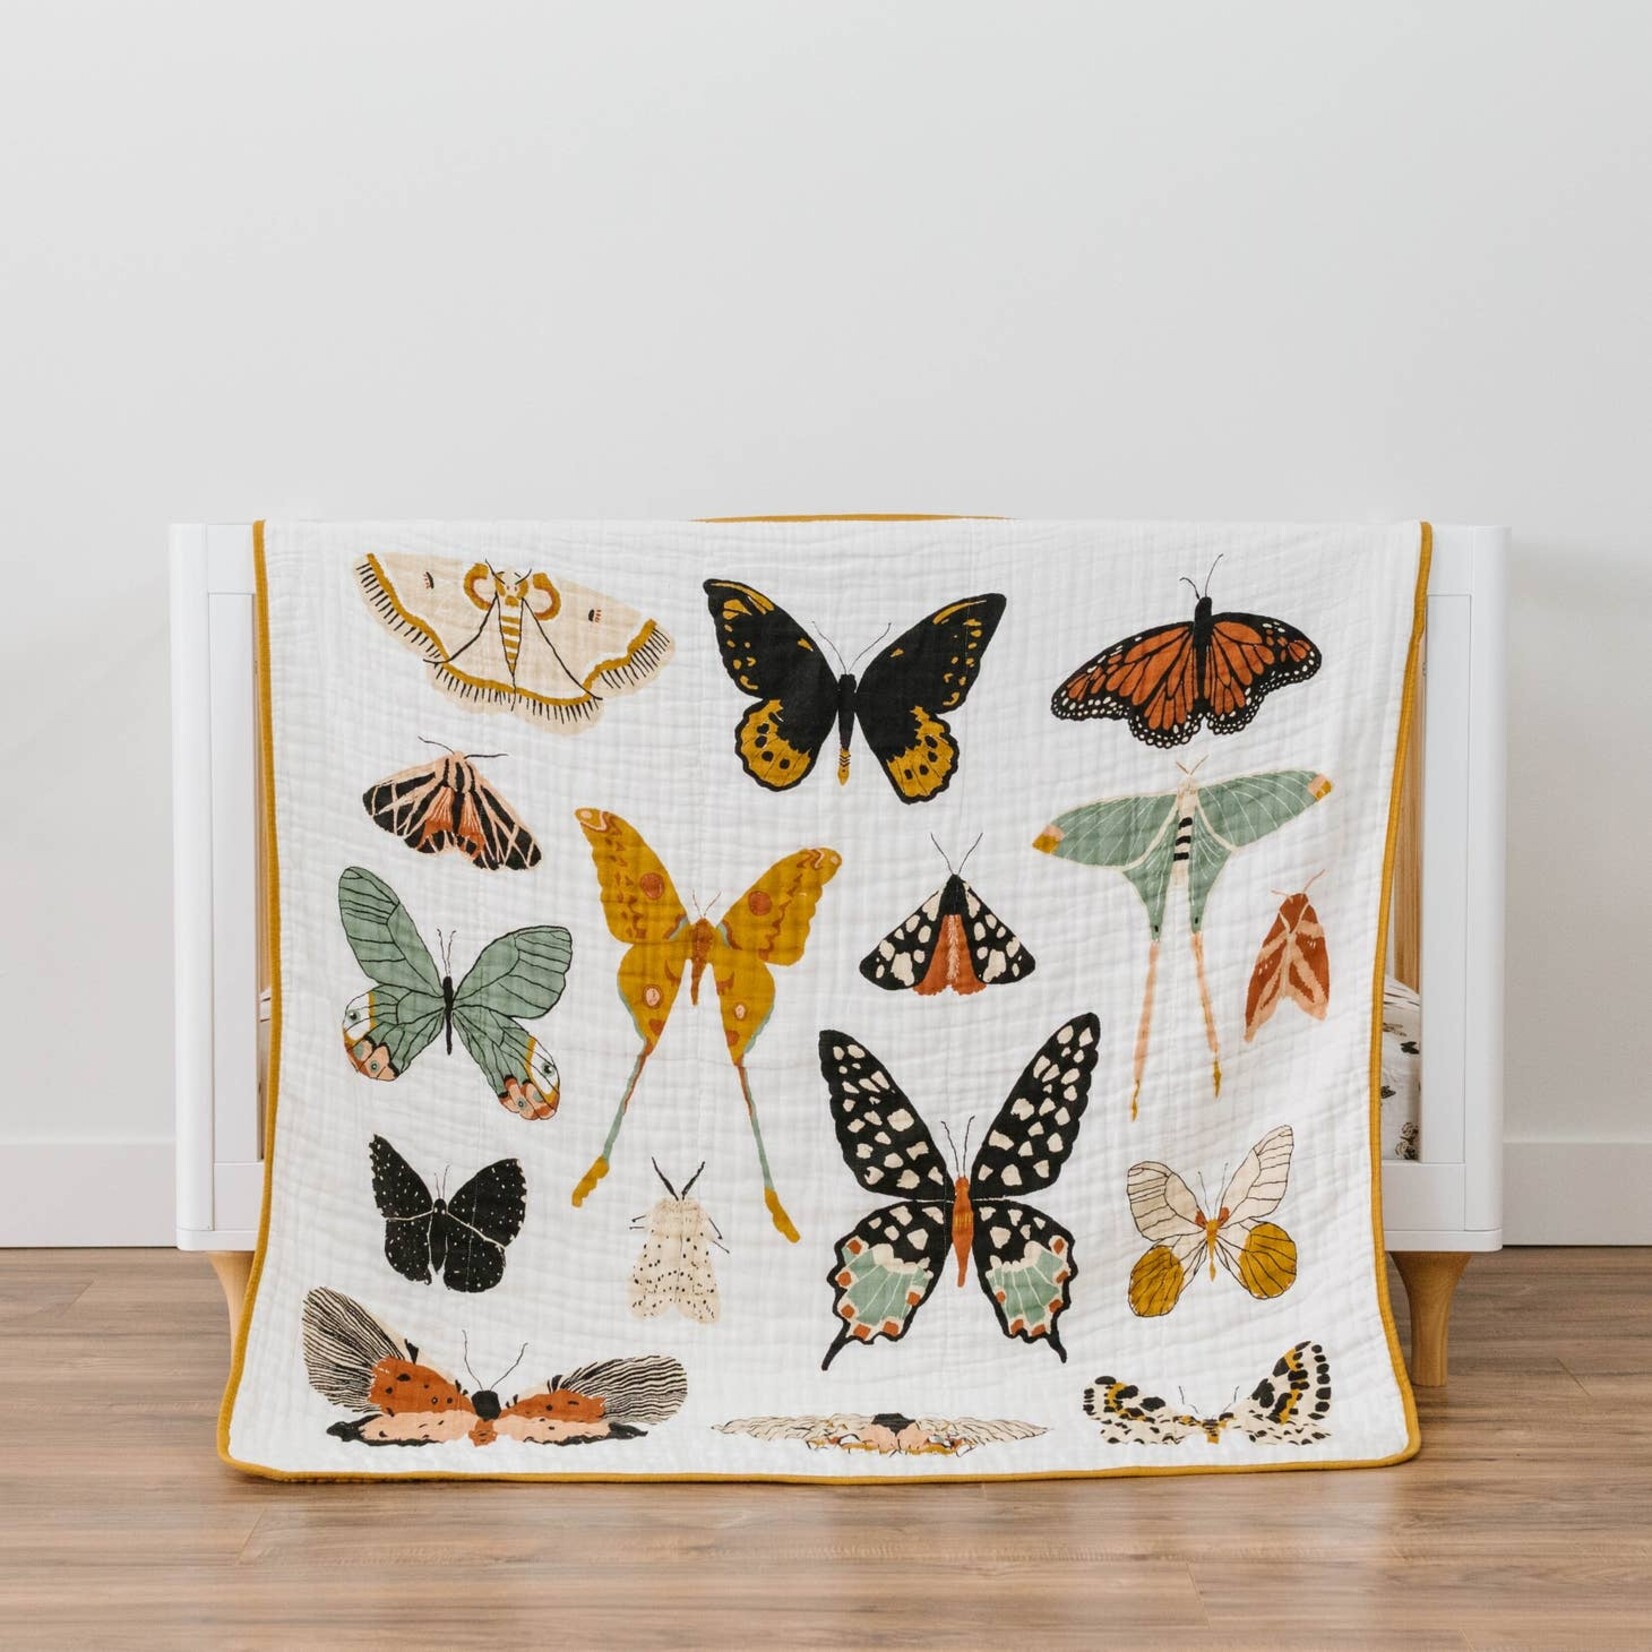 clementine butterfly collector quilt